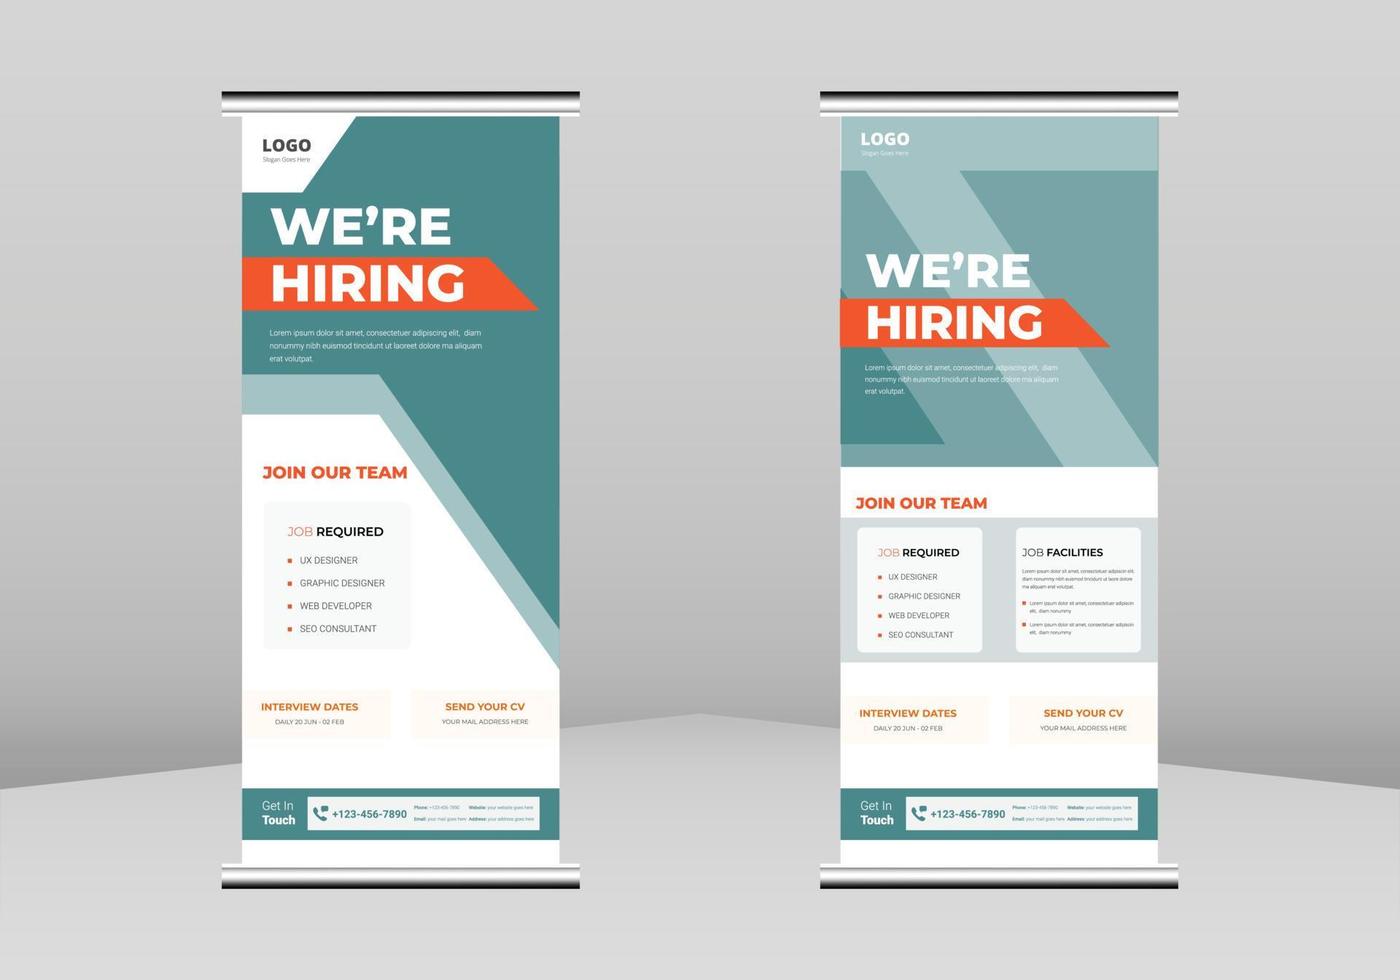 We are Hiring Roll up Banner Design, We are Hiring Roll up leaflet template. We are Hiring flyer poster template. Hiring Employee DL Flyer, Trend Business Roll Up Banner Design vector